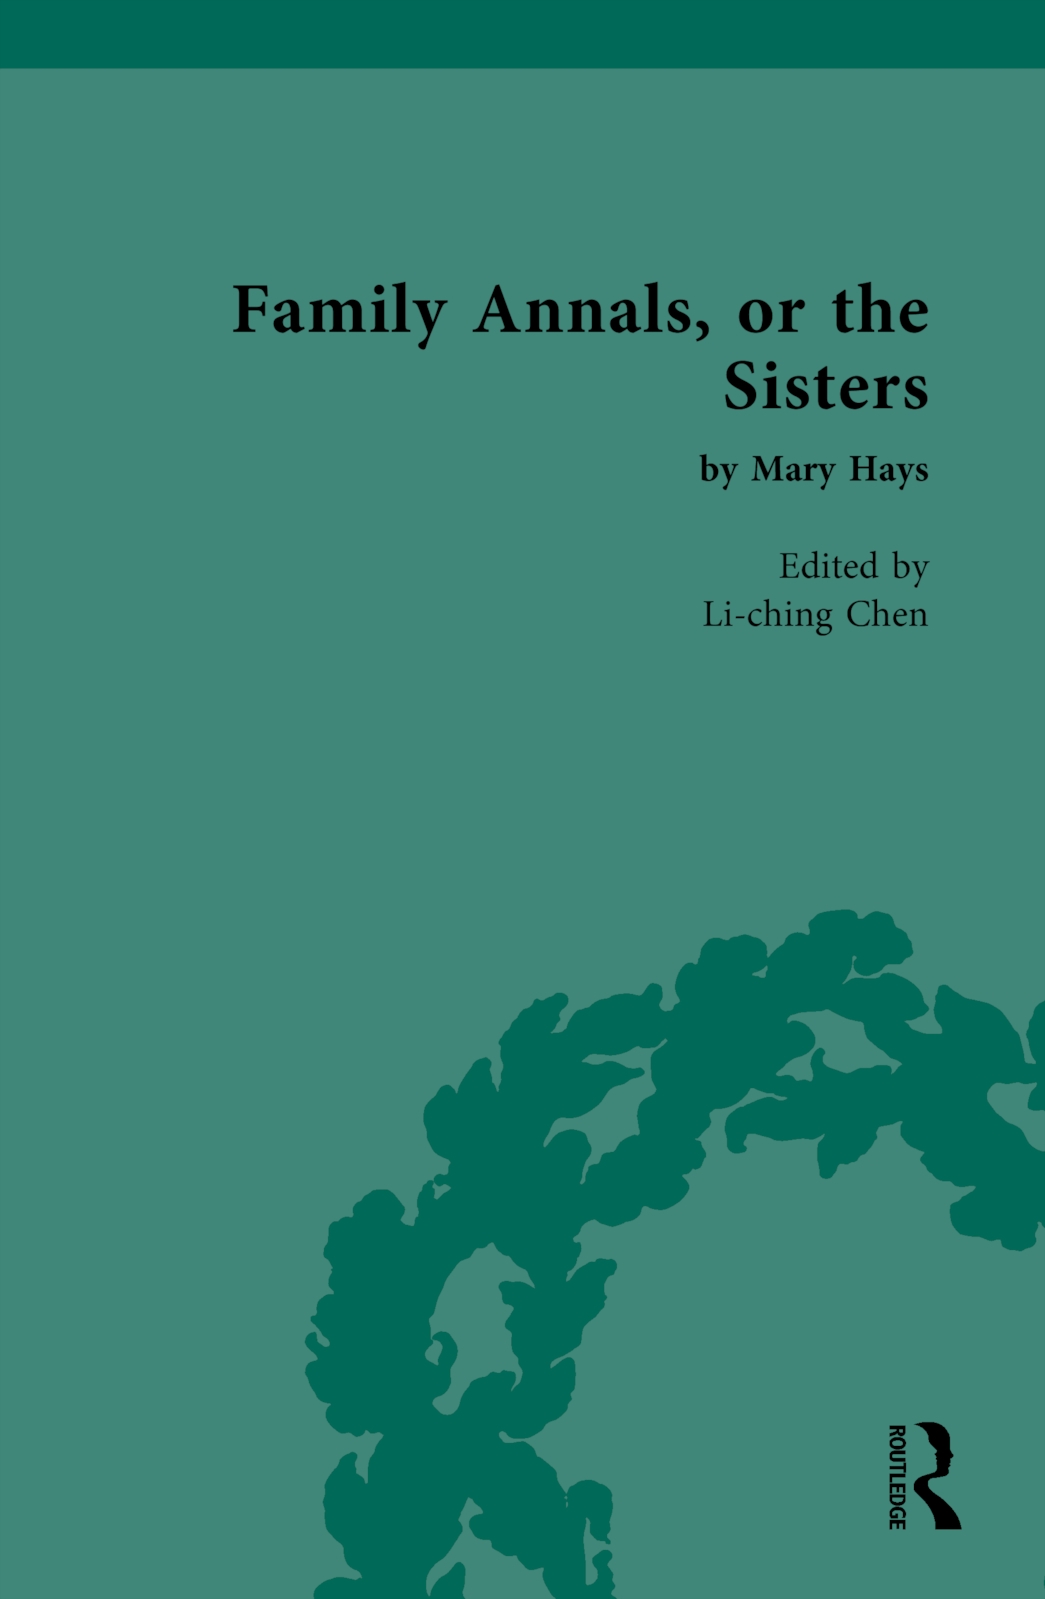 Family Annals, or the Sisters: By Mary Hays